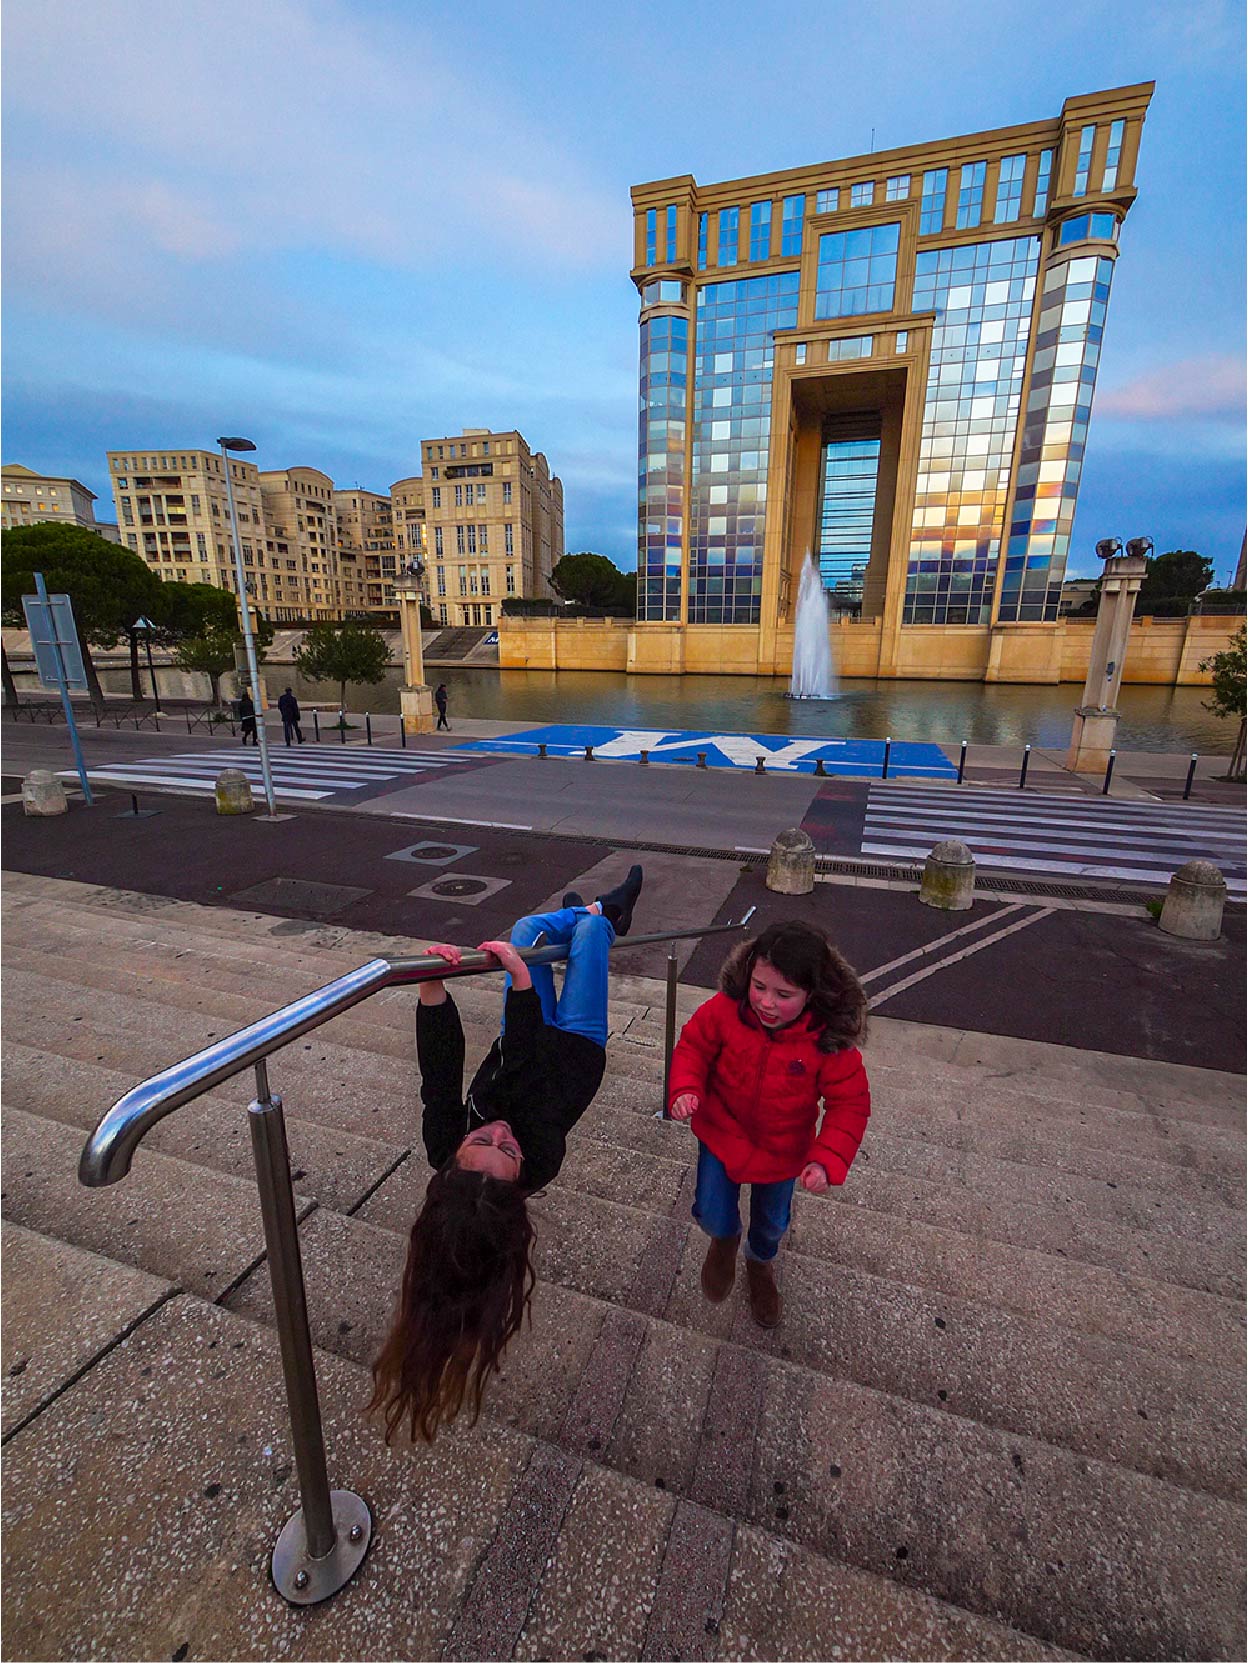 Kids playing in front of Hotel de Région in Montpellier